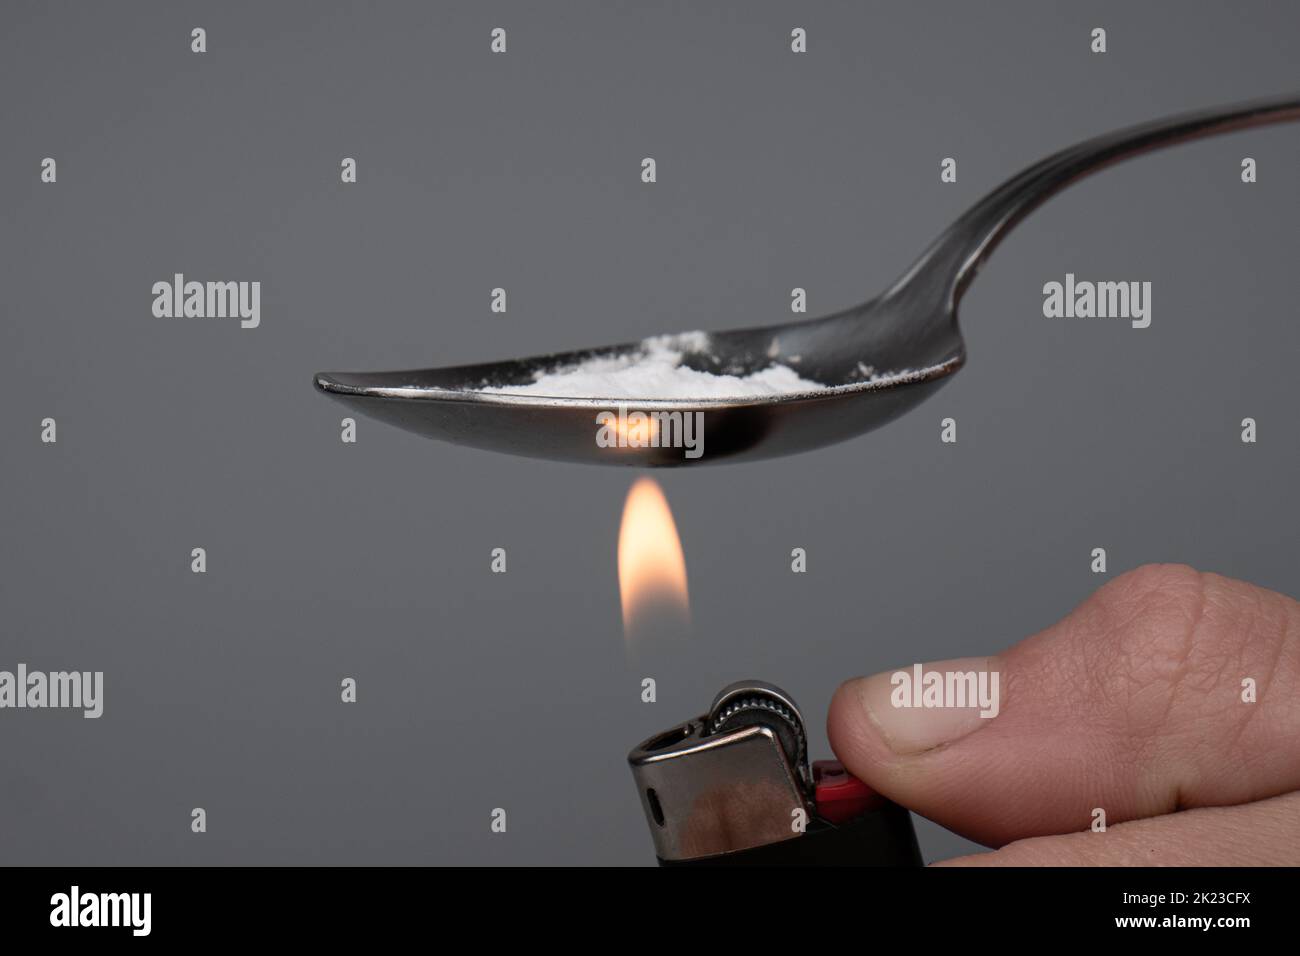 cooking with a lighter a narcotic substance on a spoon, boiling crystal drugs. Stock Photo